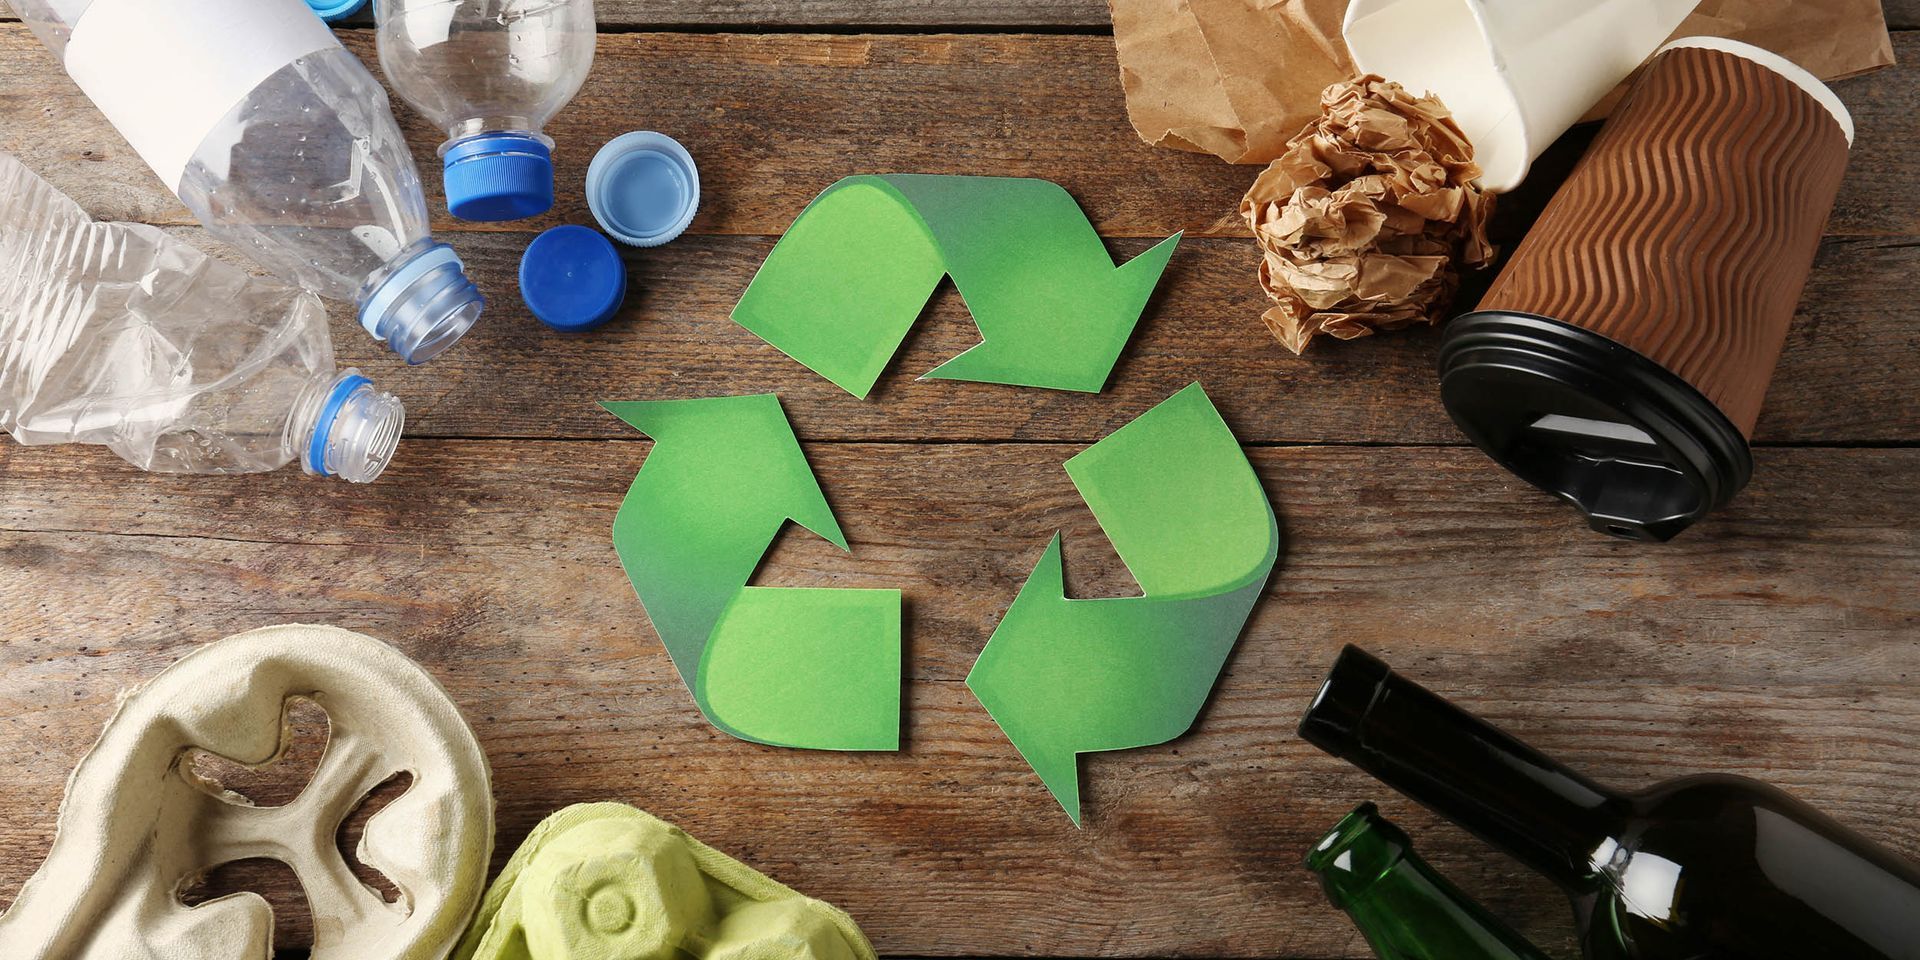 RECYCLING SYMBOL WITH PRODUCTS AROUND